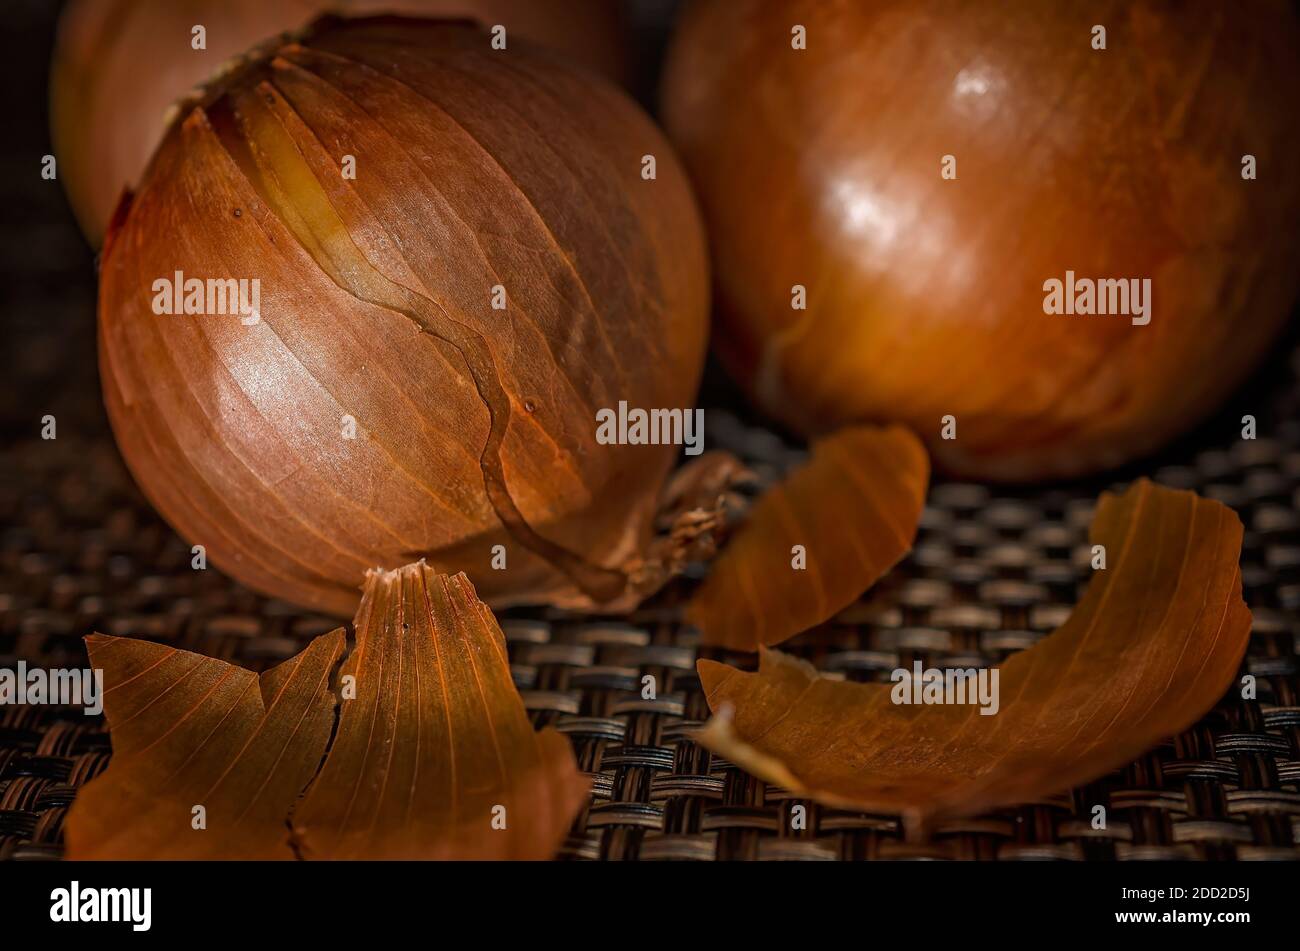 Three yellow onions are pictured unpeeled. Yellow onions are a variety of onion with a whitish, yellow inside and yellow, brown or reddish skin. Stock Photo